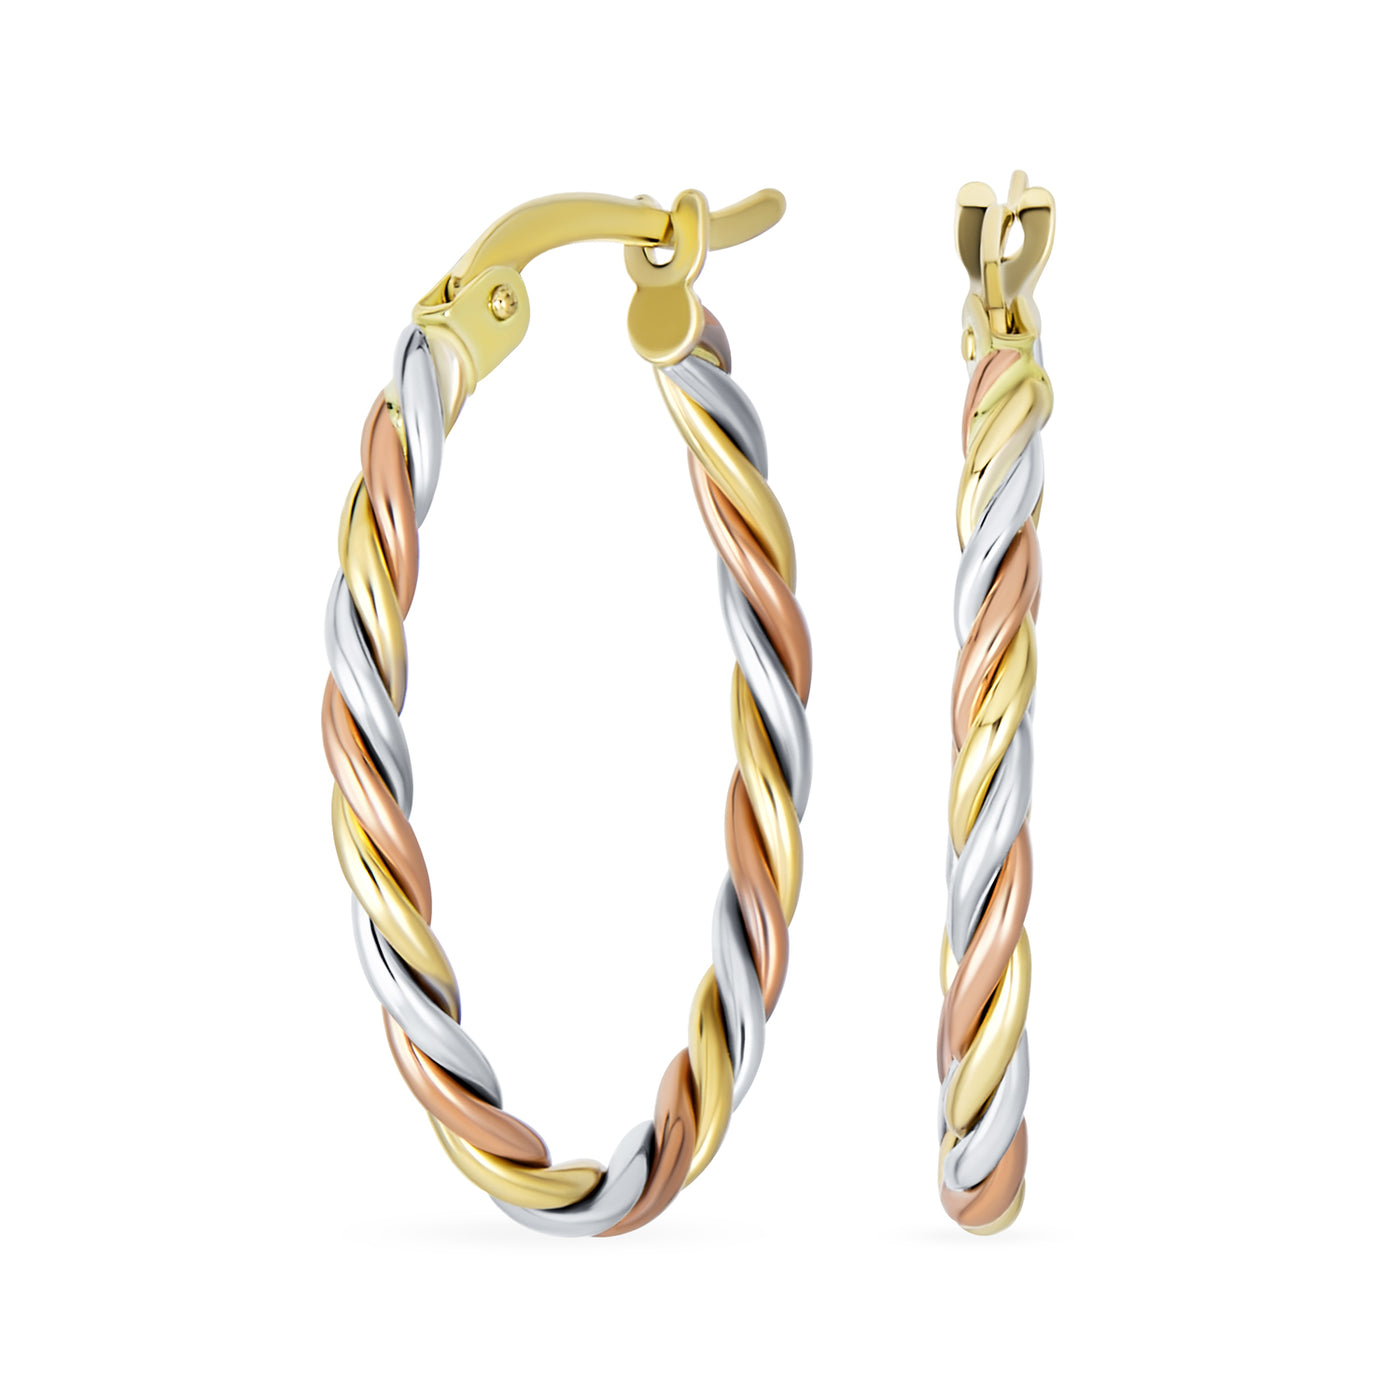 Genuine Real 14K Tricolor Gold 3 Strand Twist Cable Oval Hoop Earrings